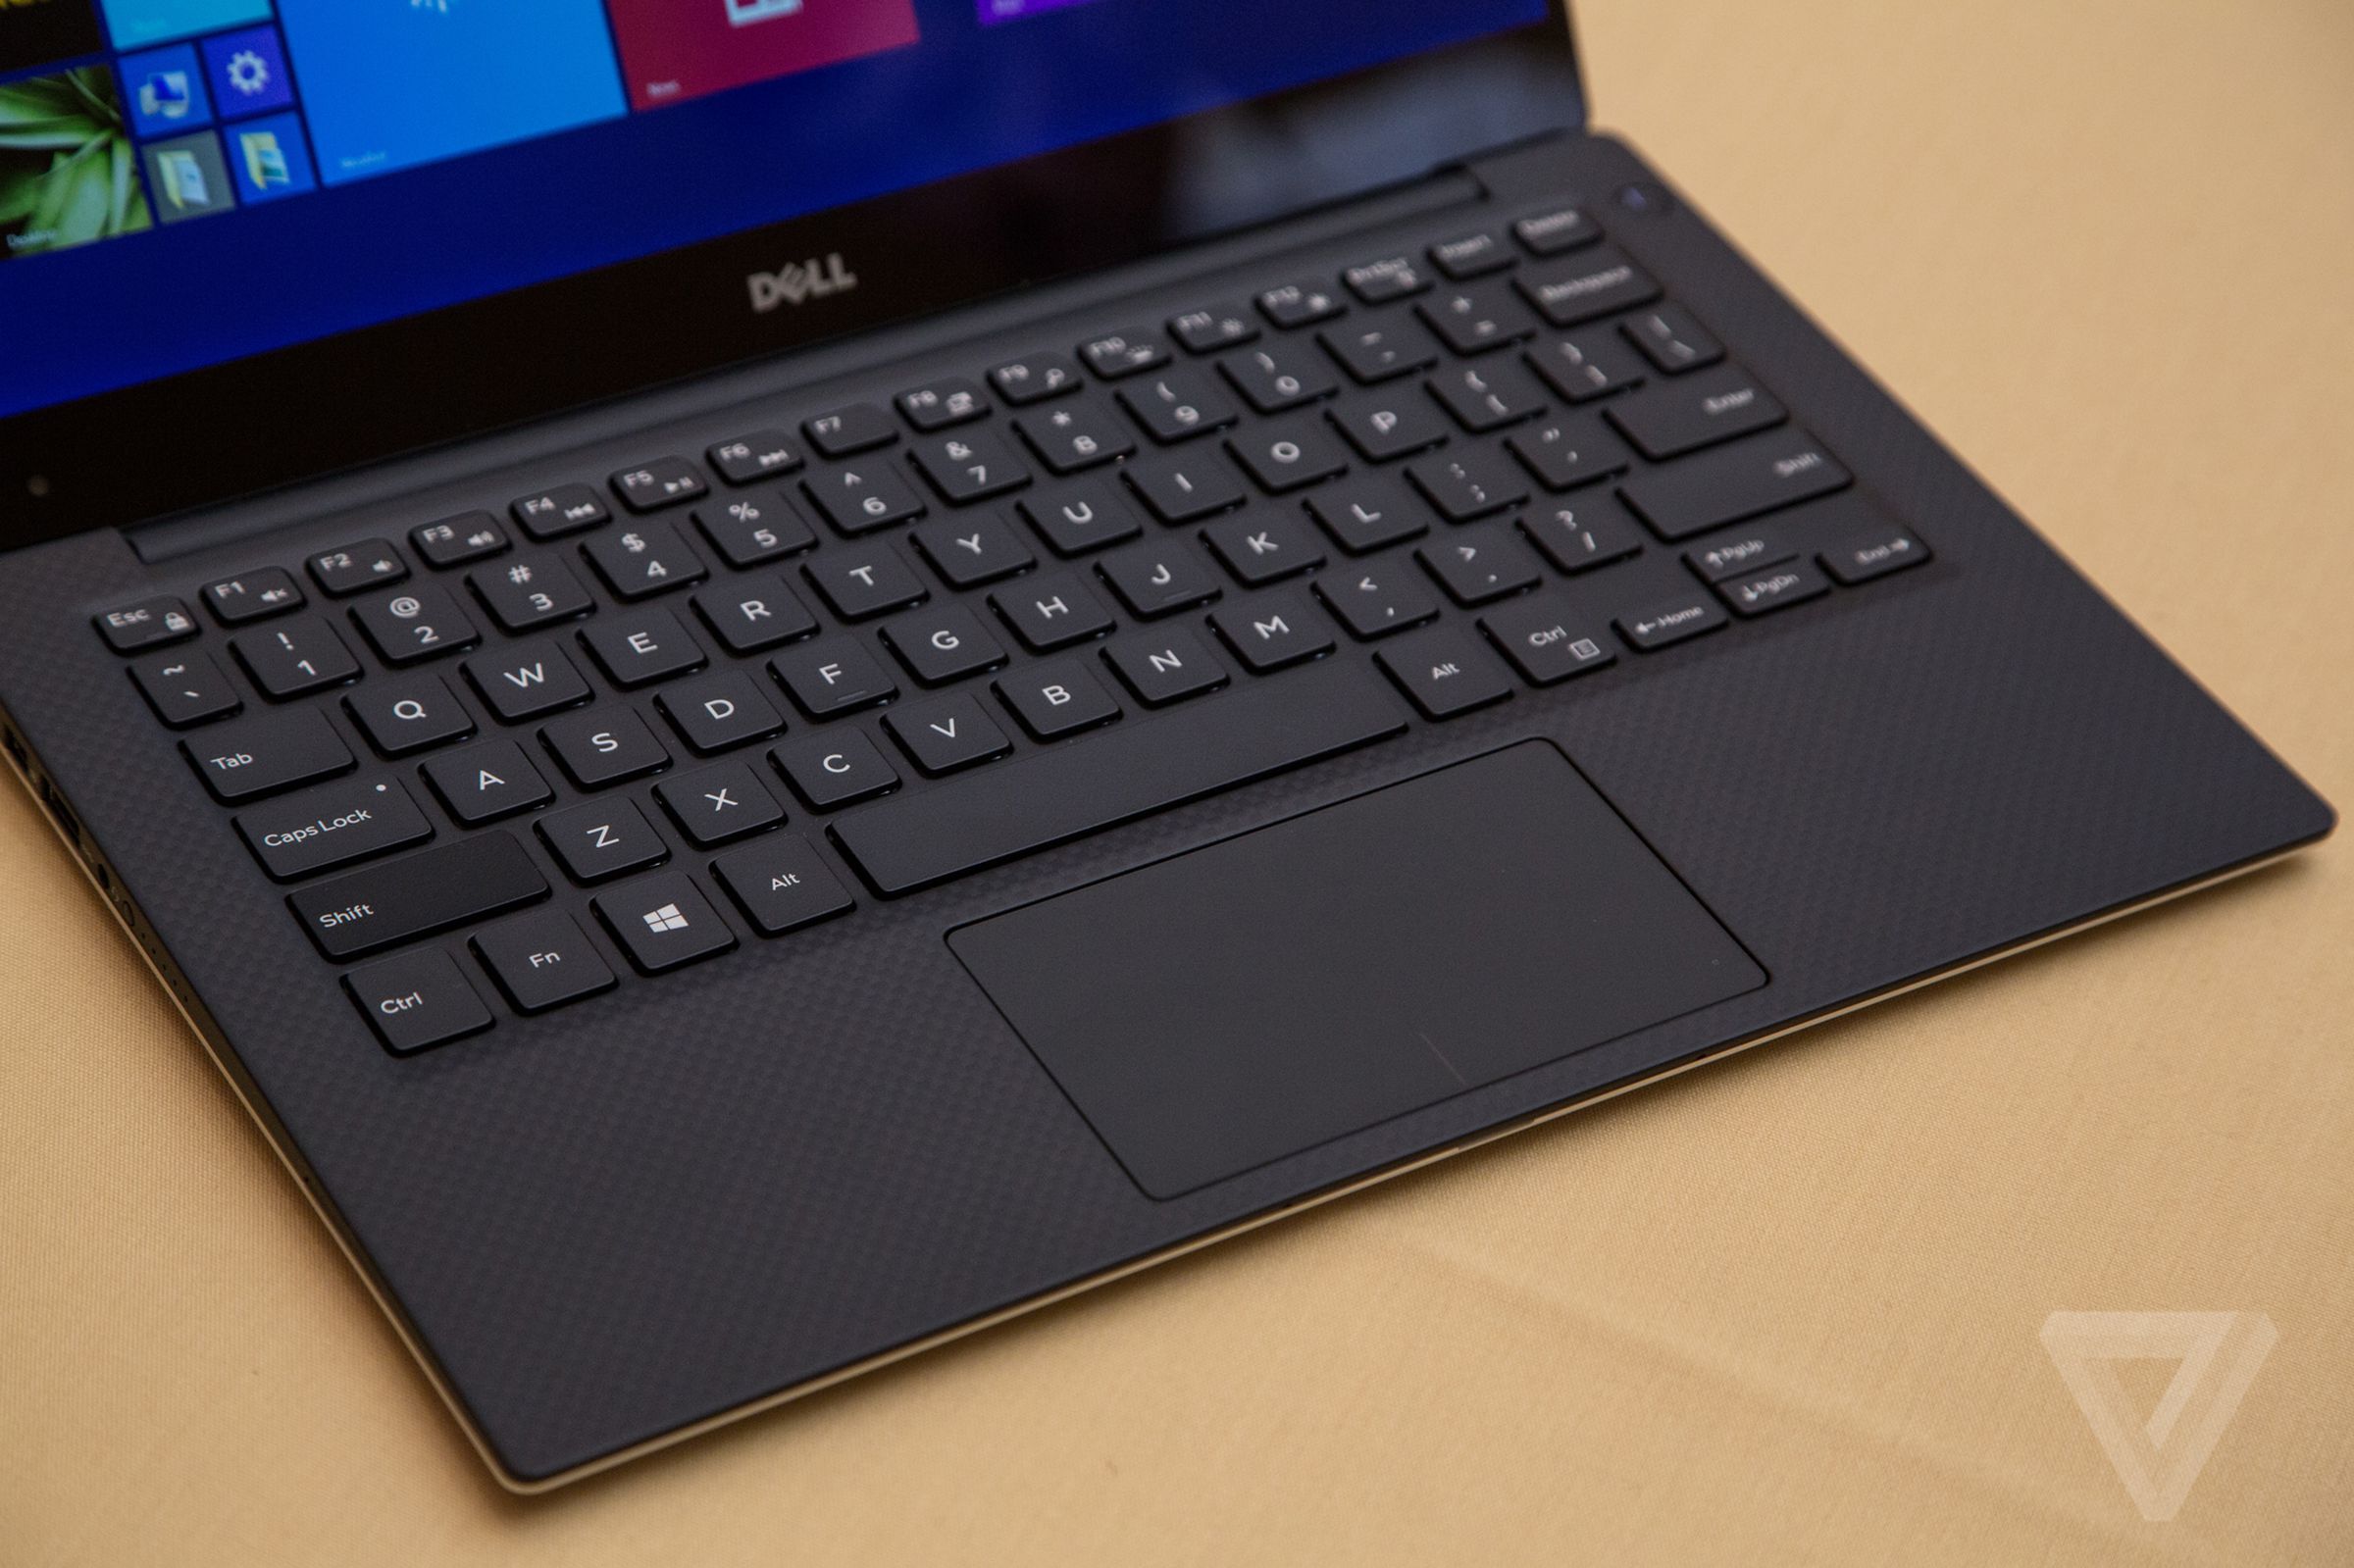 Dell XPS 13 and 15 photos